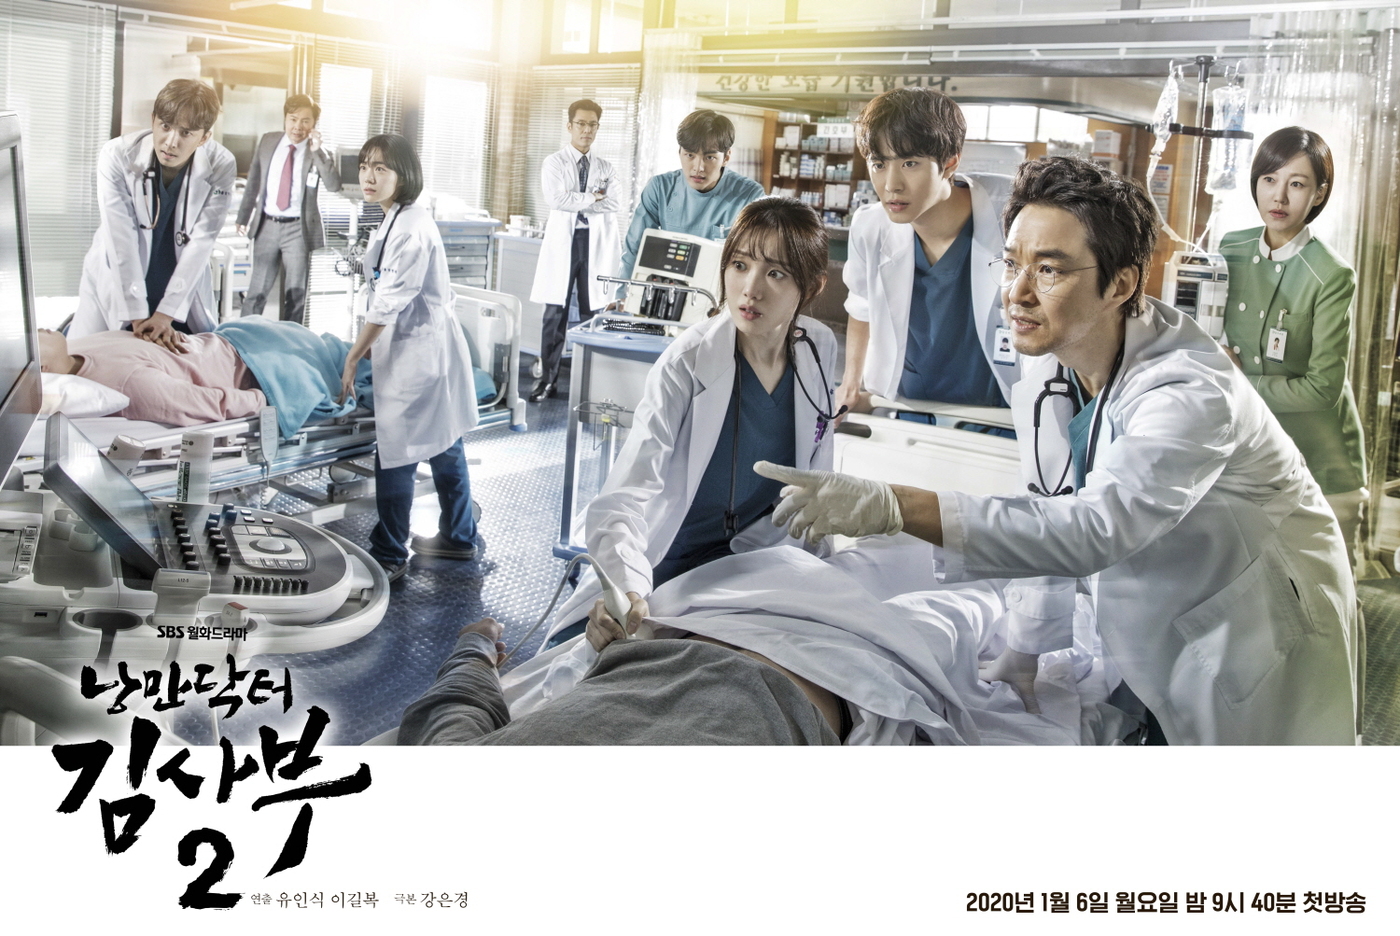 Seoul = = In January 2020, SBS Romantic Doctor Kim Sabu 2, which will convey the hot echo and the touching impression, unveiled the main poster that predicts the new romantic era.SBS New Moonwha Drama Romantic Doctor Kim Sabu 2 (playplayplay by Kang Eun-kyung/directed by Yoo In-sik/produced by Samhwa Networks) is a real Doctors story that takes place in the background of a shabby stone wall hospital in the province, and it contains the contents of meeting the geeky genius doctor Kim Sabu (Han Suk-kyu) to find the real romance of life.Following the first episode that covered the Republic of Korea with a romantic wave in 2016, it is expected to attract the house theater with a richer and more exciting episode and an impact-strong narrative.In this regard, two main posters, which contain the symbolic meaning of Romantic Doctor Kim Sabu 2, are being unveiled and focused attention.The nine-member Poster, featuring nine major cast members, including the title roll, Han Suk-kyus one-man Poster, and Han Suk-kyu Lee Sung-kyung Ahn Hyo-seop Jin Kyeong Im Won-hee Kim Min-jae Yun-jae Kim Joo-heon, So Ju-yeon, and Romantic Doctor Kim Sabu 1 and contextually It is completed with a unique watercolor tone color that is shared with each other, and it conveys the liveliness that seems to breathe alive.Han Suk-kyus one-man Poster intensely captured the return of Kim Sabu, who was finally returning to the romantic doctor Kim Sabu who had been waiting for three years.Han Suk-kyus charismatic side is clearly filled with Kim Sabu, who is busy walking through the middle of the corridor of Doldam Hospital.The charismatic Kim Sabus force, which passes by the doctors gown in the red hospital corridor as if the glow is falling, is making you expect a resonant move that will continue in Romantic Doctor Kim Sabu 2.In the 9-person Poster, where nine protagonists gathered in the emergency room of Doldam Hospital, the faces of characters with a completely different charm are causing tension.With Han Suk-kyu and Lee Sung-kyung and Ahn Hyo-seop looking at the state of the lying patient, Jin Kyeong and Kim Min-jae are concentrating on the patient with medical equipment waiting just behind the three.In addition, I am curious about Kim Joo-heon, who is making a heavy expression with his arms folded, and Im Won-hee, who is urgently calling somewhere, on the back of Yoon-tree, who is on the bed and performing CPR on the patient,Han Suk-kyu Lee Sung-kyung Ahn Hyo-seop Jin Kyeong Im Won-hee Kim Min-jae Yoon Ju-heon, and other nine leading characters serious and urgent expressions are amplifying their curiosity about various incidents that will be caused by entangled and entangled in Doldam Hospital in the future.Meanwhile, SBS Romantic Doctor Kim Sabu 2 will be broadcasted at 9:40 pm on Monday, January 6, 2020, following VIP.